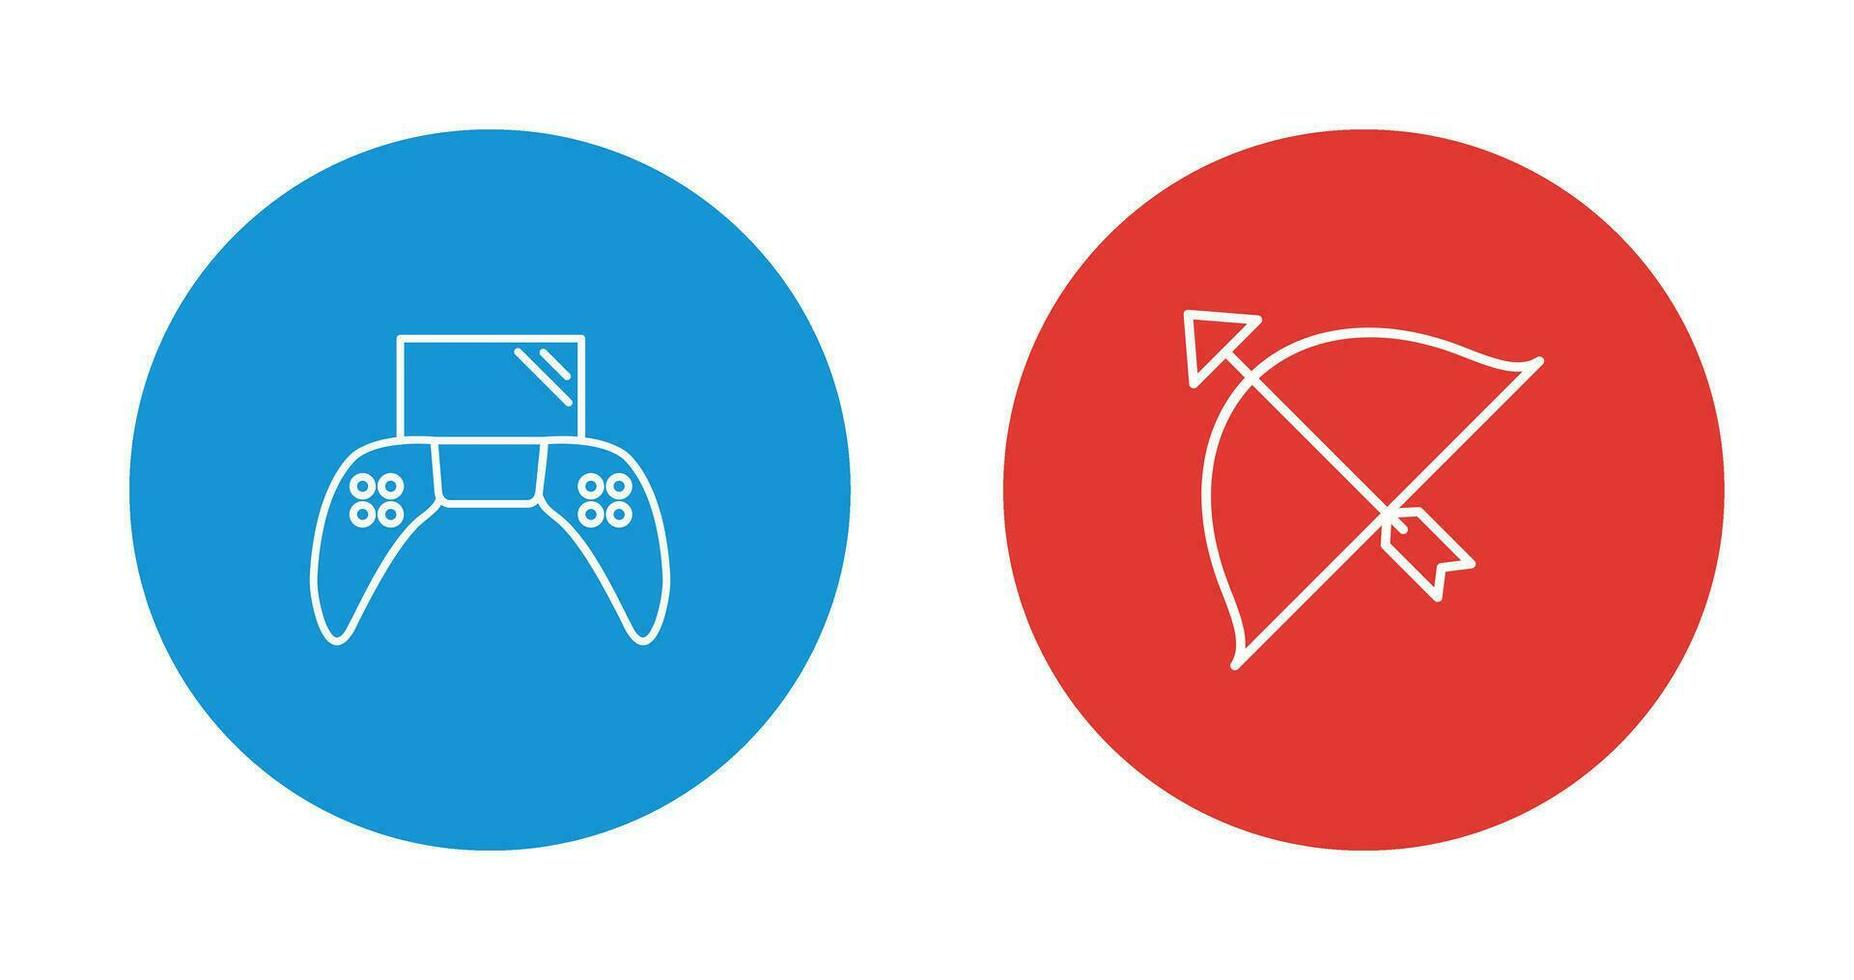 Play Station and Archery Icon vector